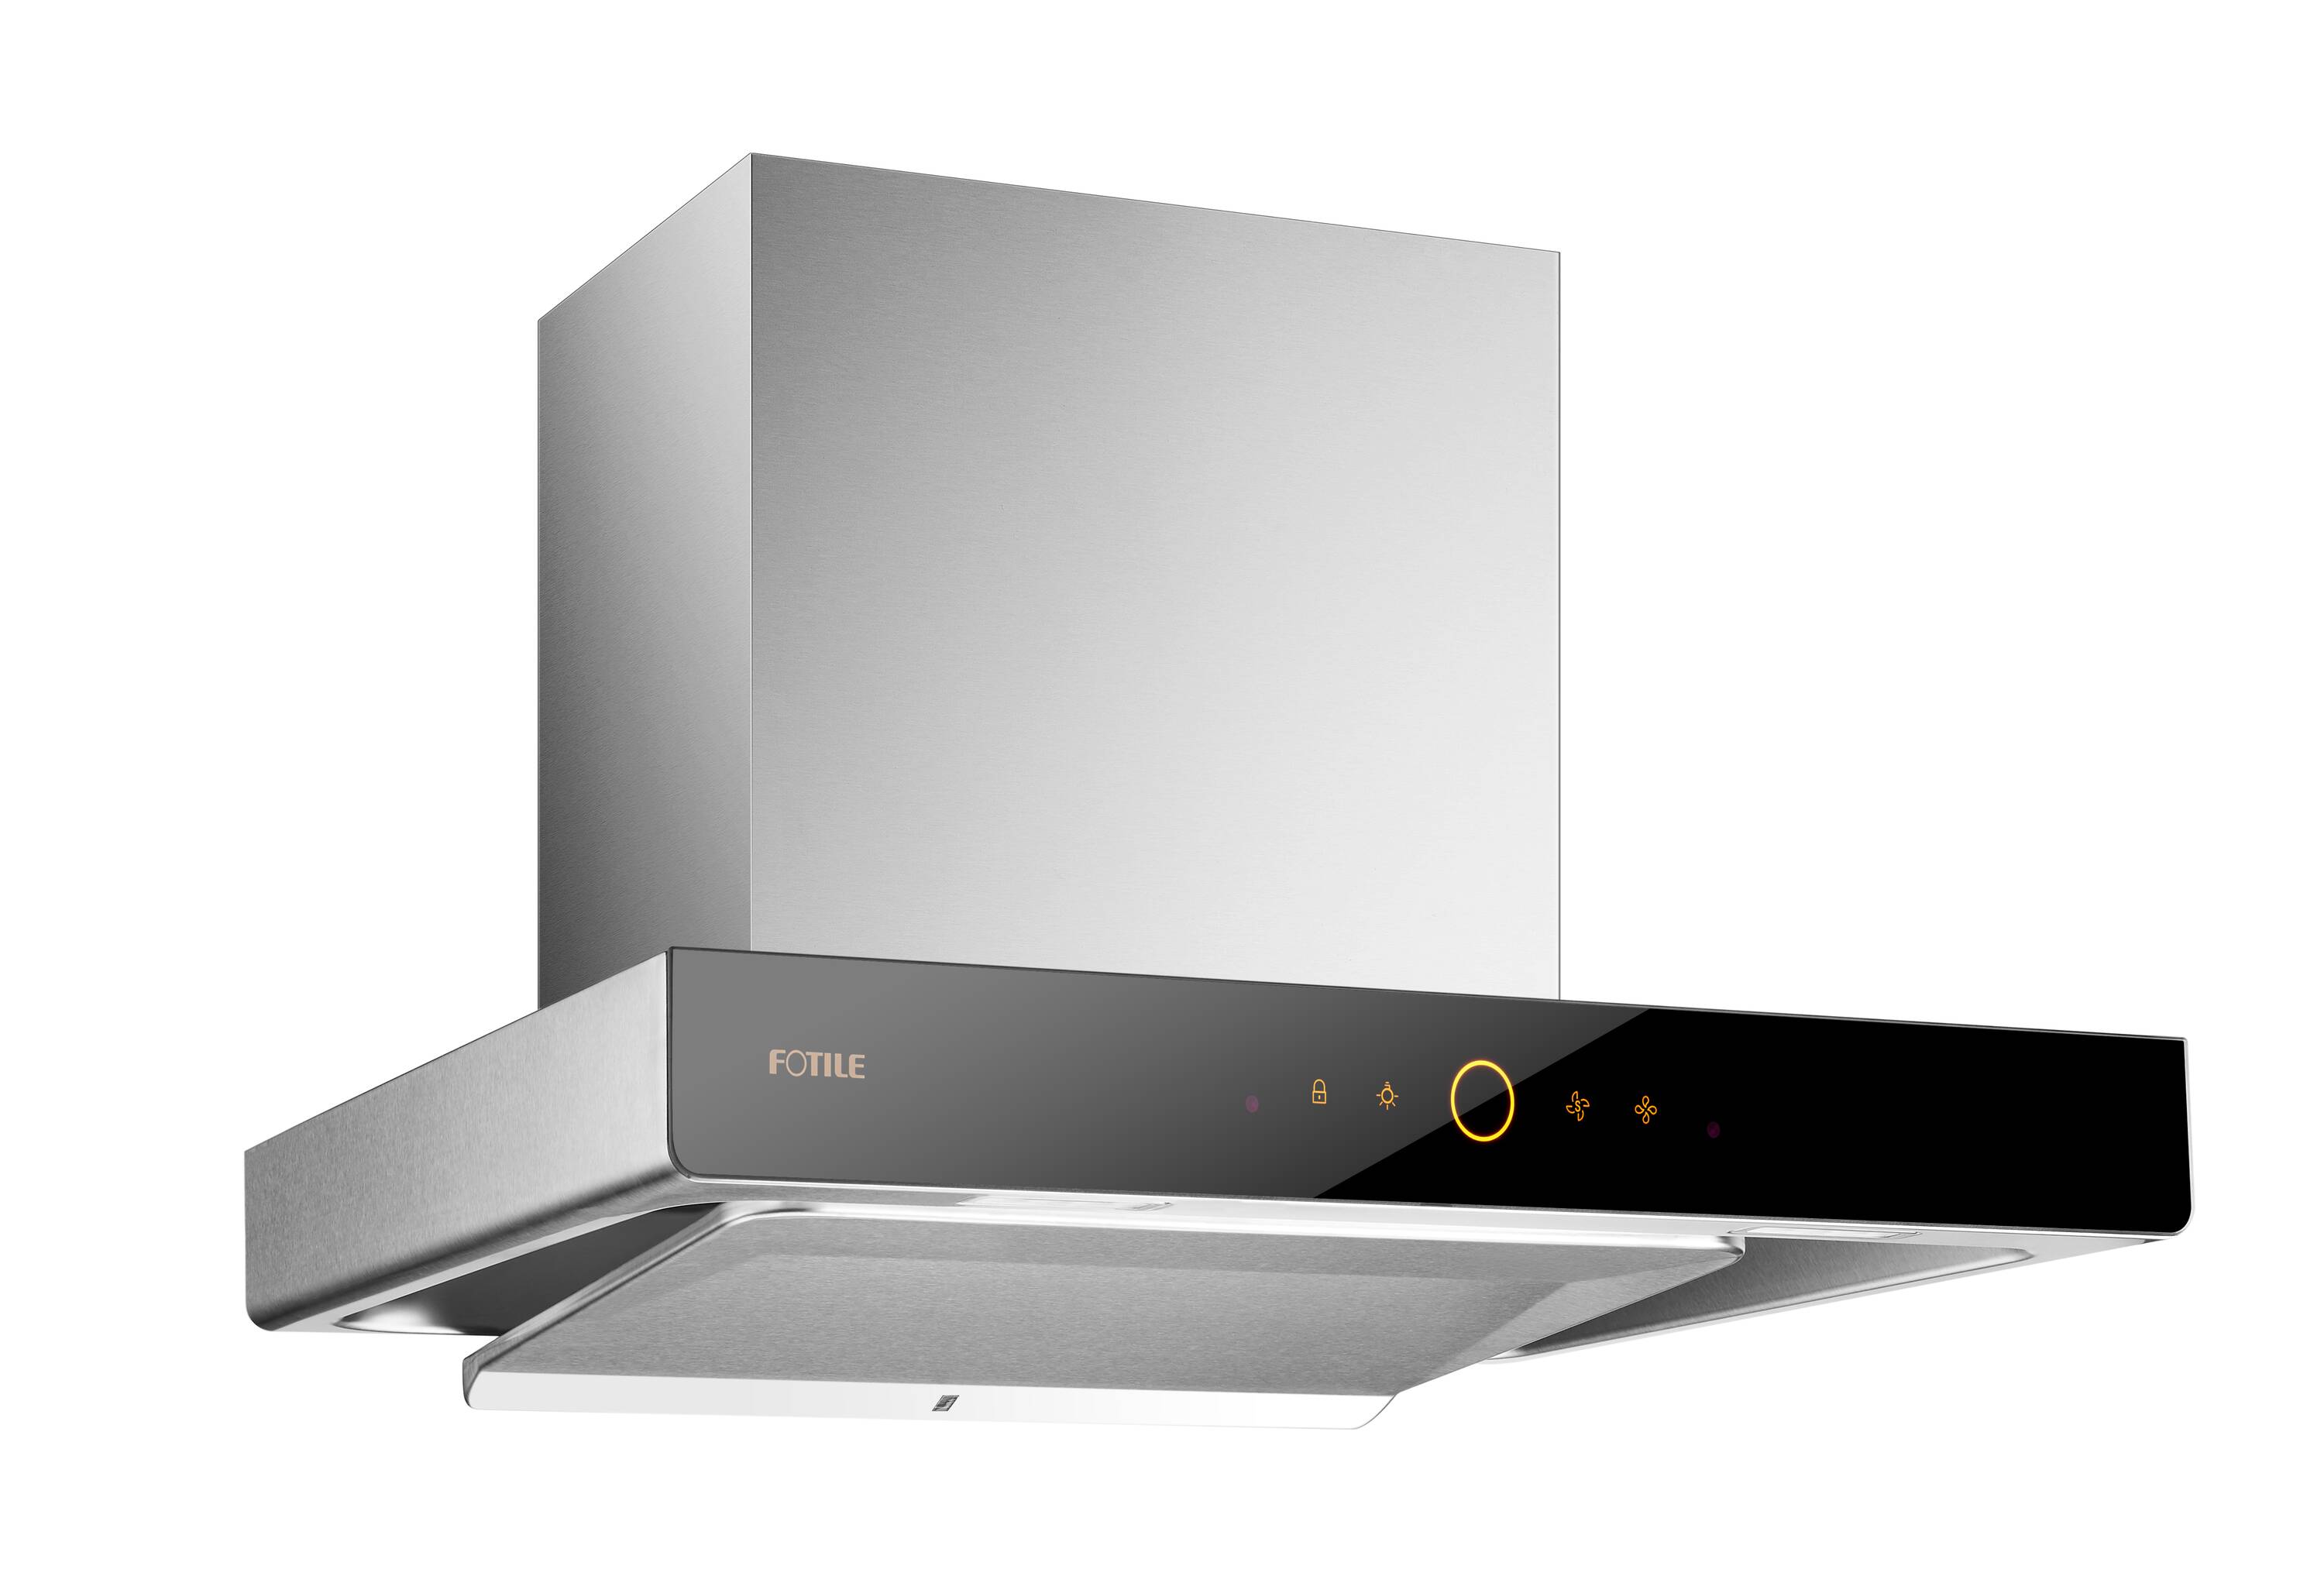 FOTILE Slant Vent Series 30 850 CFM Under Cabinet or Wall Mount Range Hood  with 2 LED light and Push Buttons, Tempered Glass - Bed Bath & Beyond -  31289974